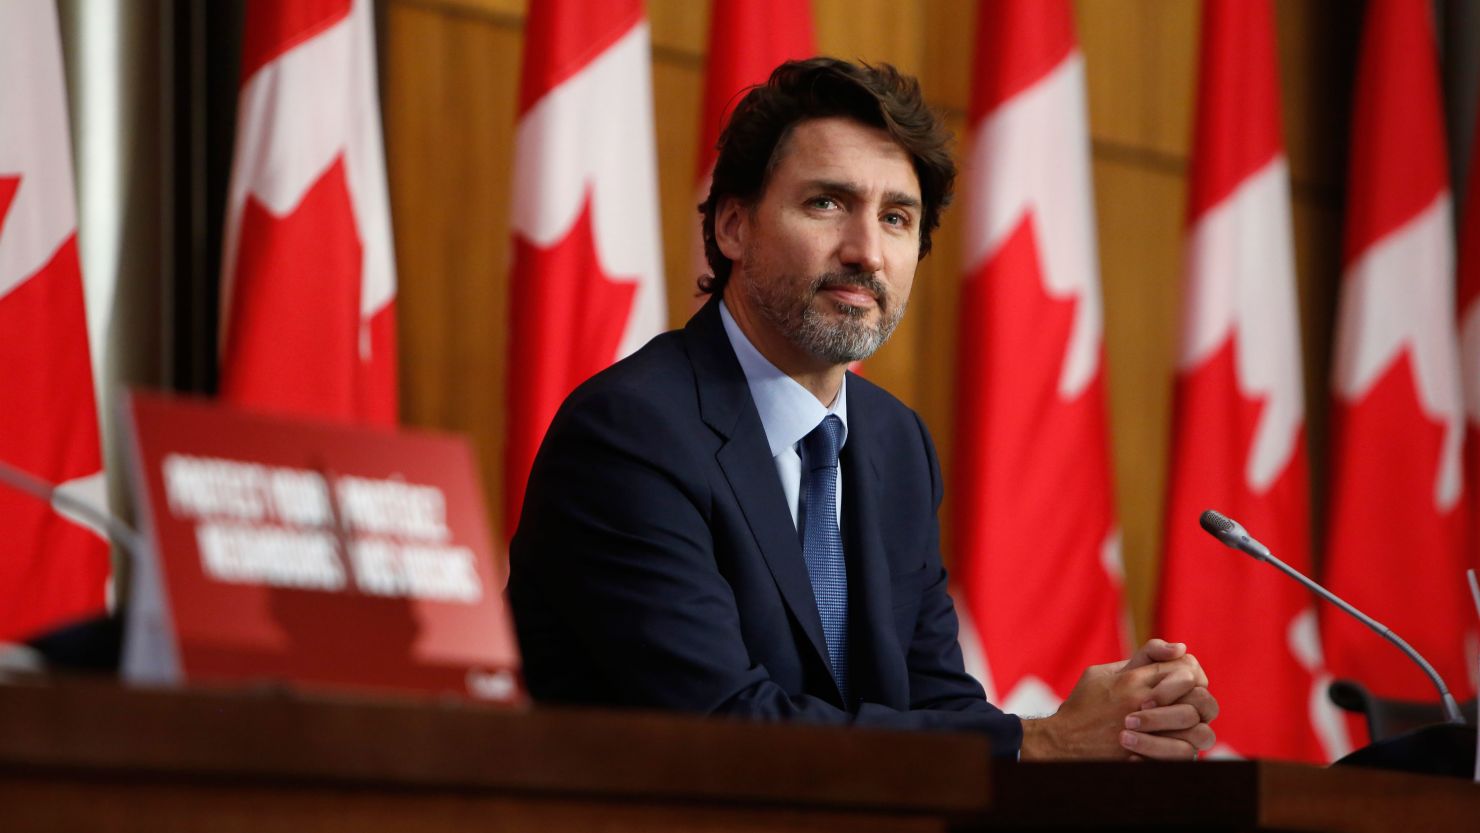 Canadian Prime Minister Justin Trudeau is bracing for US election fallout.